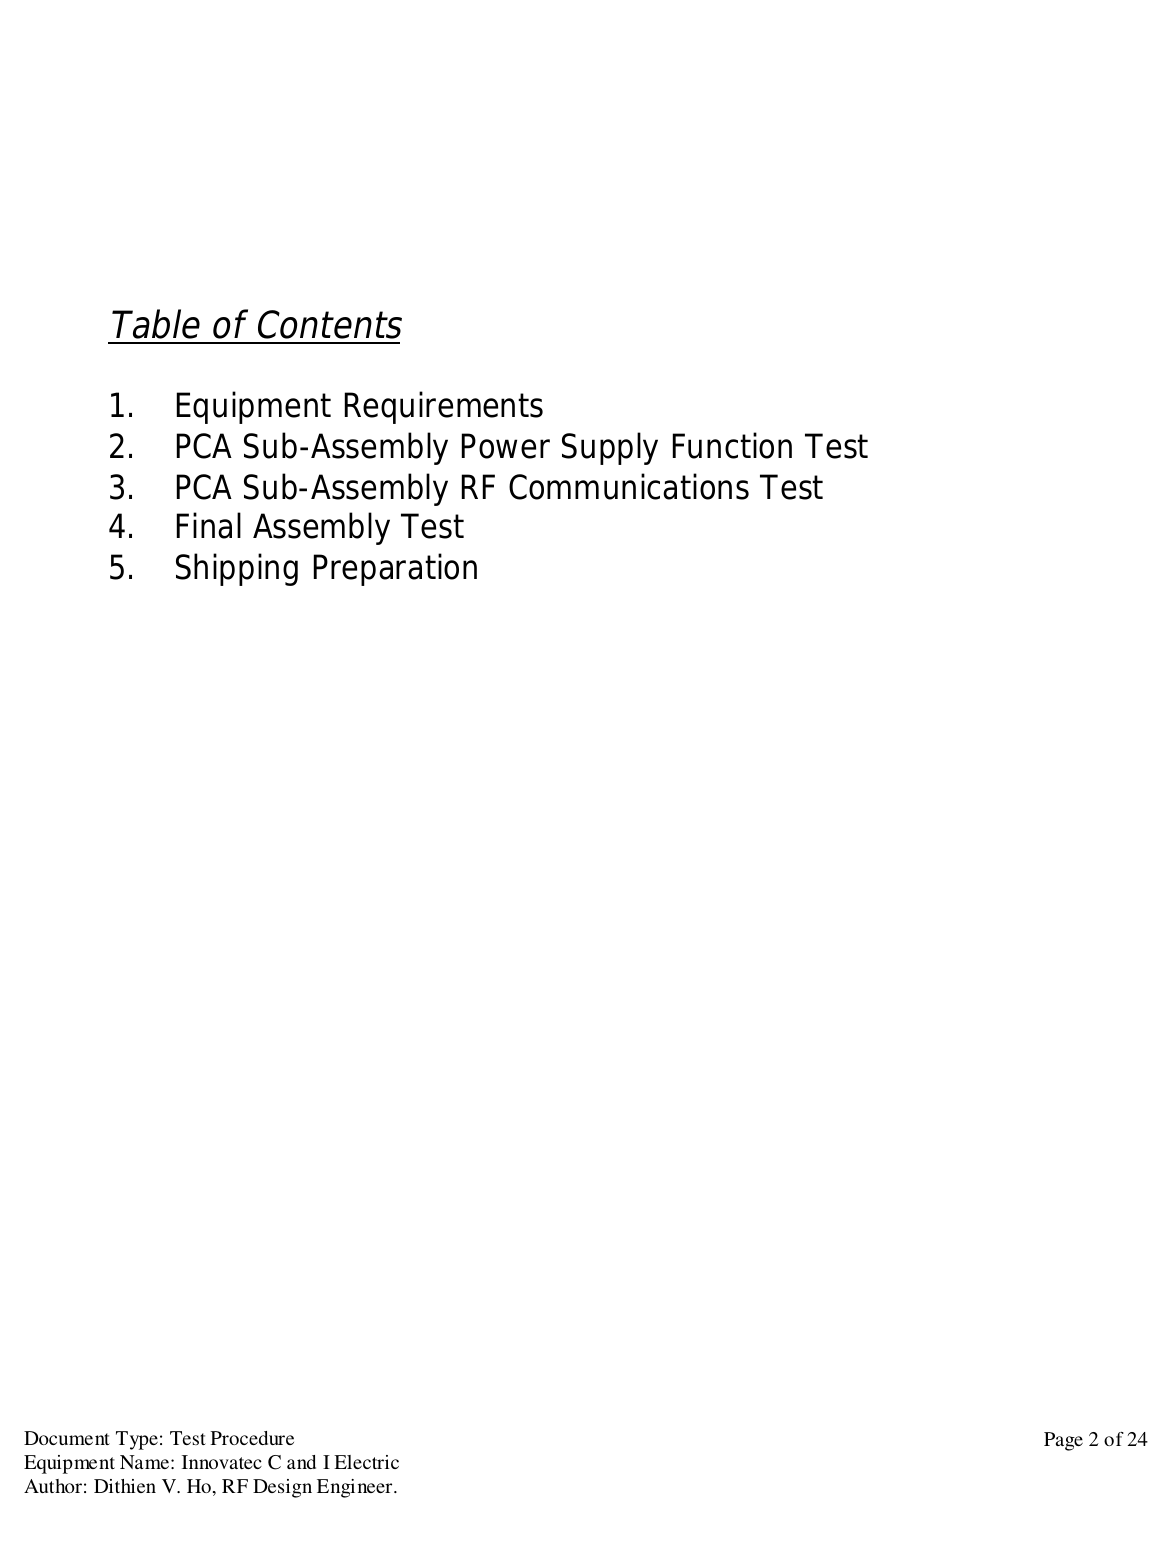 Document Type: Test ProcedureEquipment Name: Innovatec C and I ElectricAuthor: Dithien V. Ho, RF Design Engineer.Page 2 of 24Table of Contents1.   Equipment Requirements2. PCA Sub-Assembly Power Supply Function Test3. PCA Sub-Assembly RF Communications Test4. Final Assembly Test5. Shipping Preparation